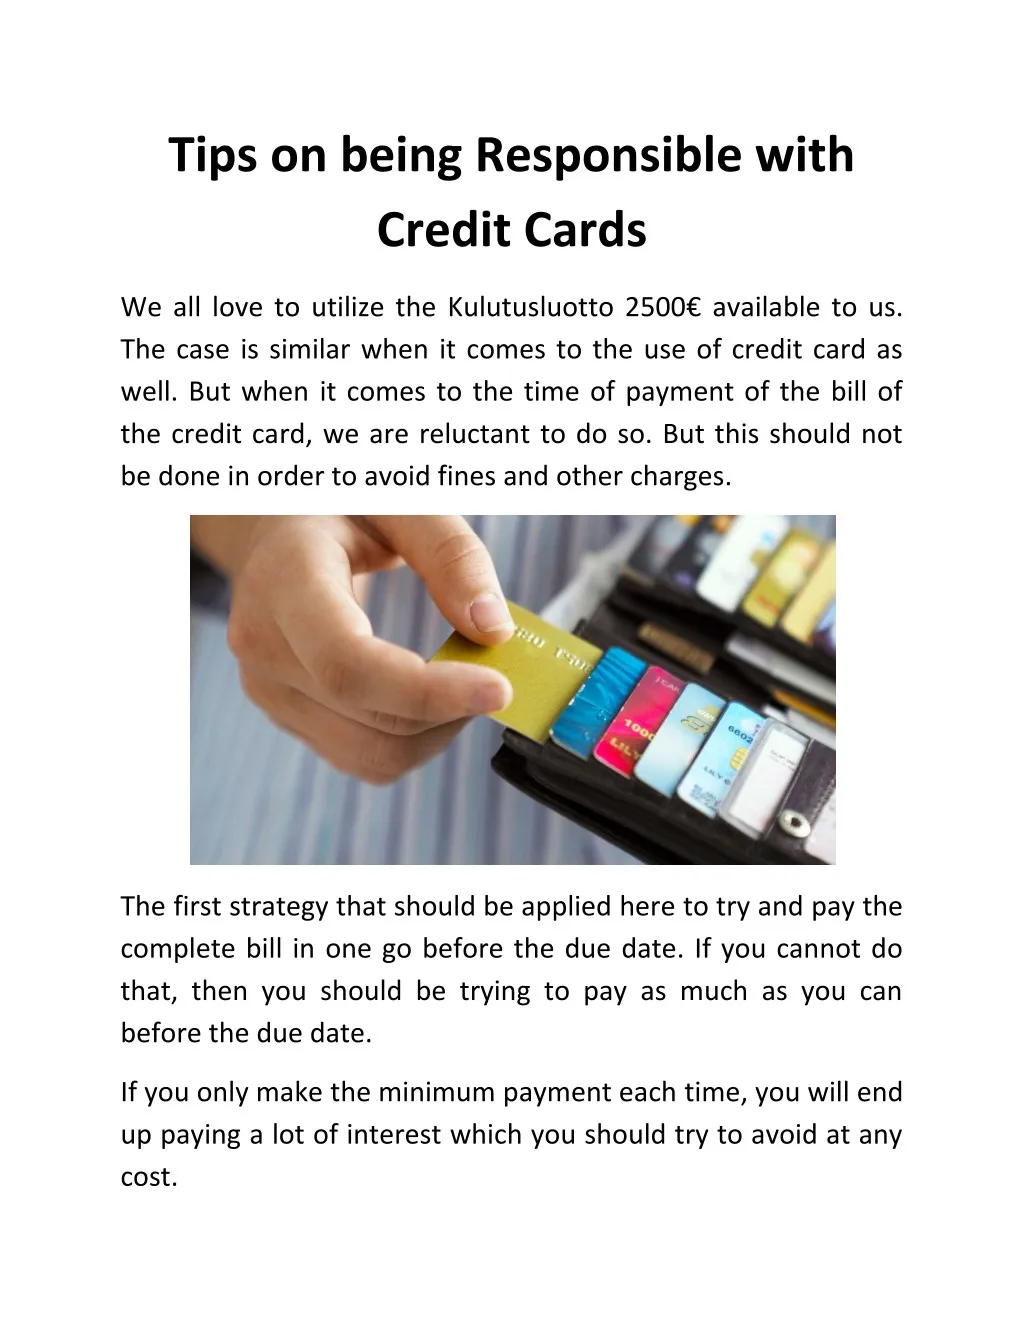 tips on being responsible with credit cards